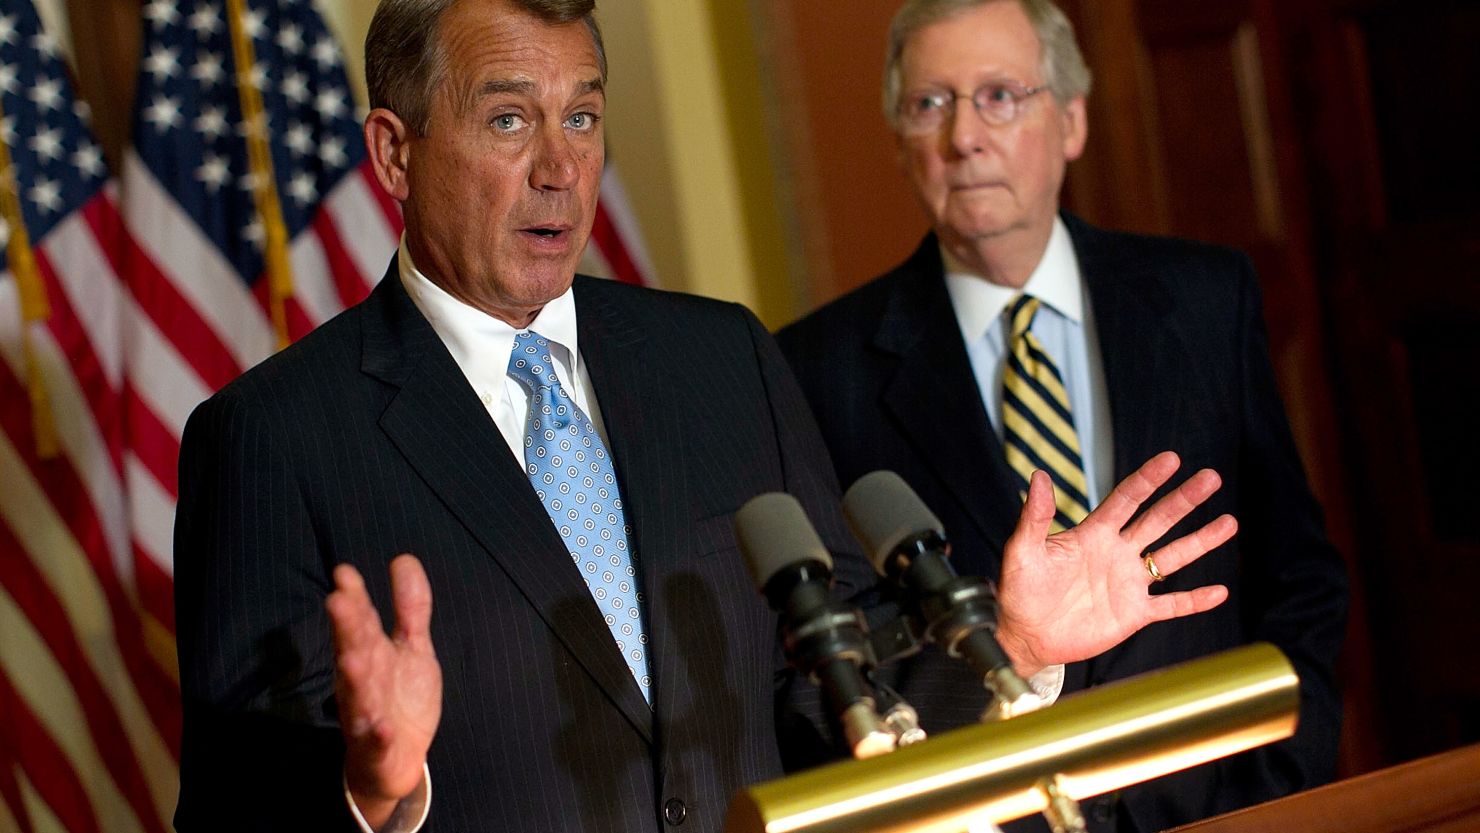 John Boehner, left, and Mitch McConnell in 2012. We can't just blame the Republican leadership, says William Bennett.  